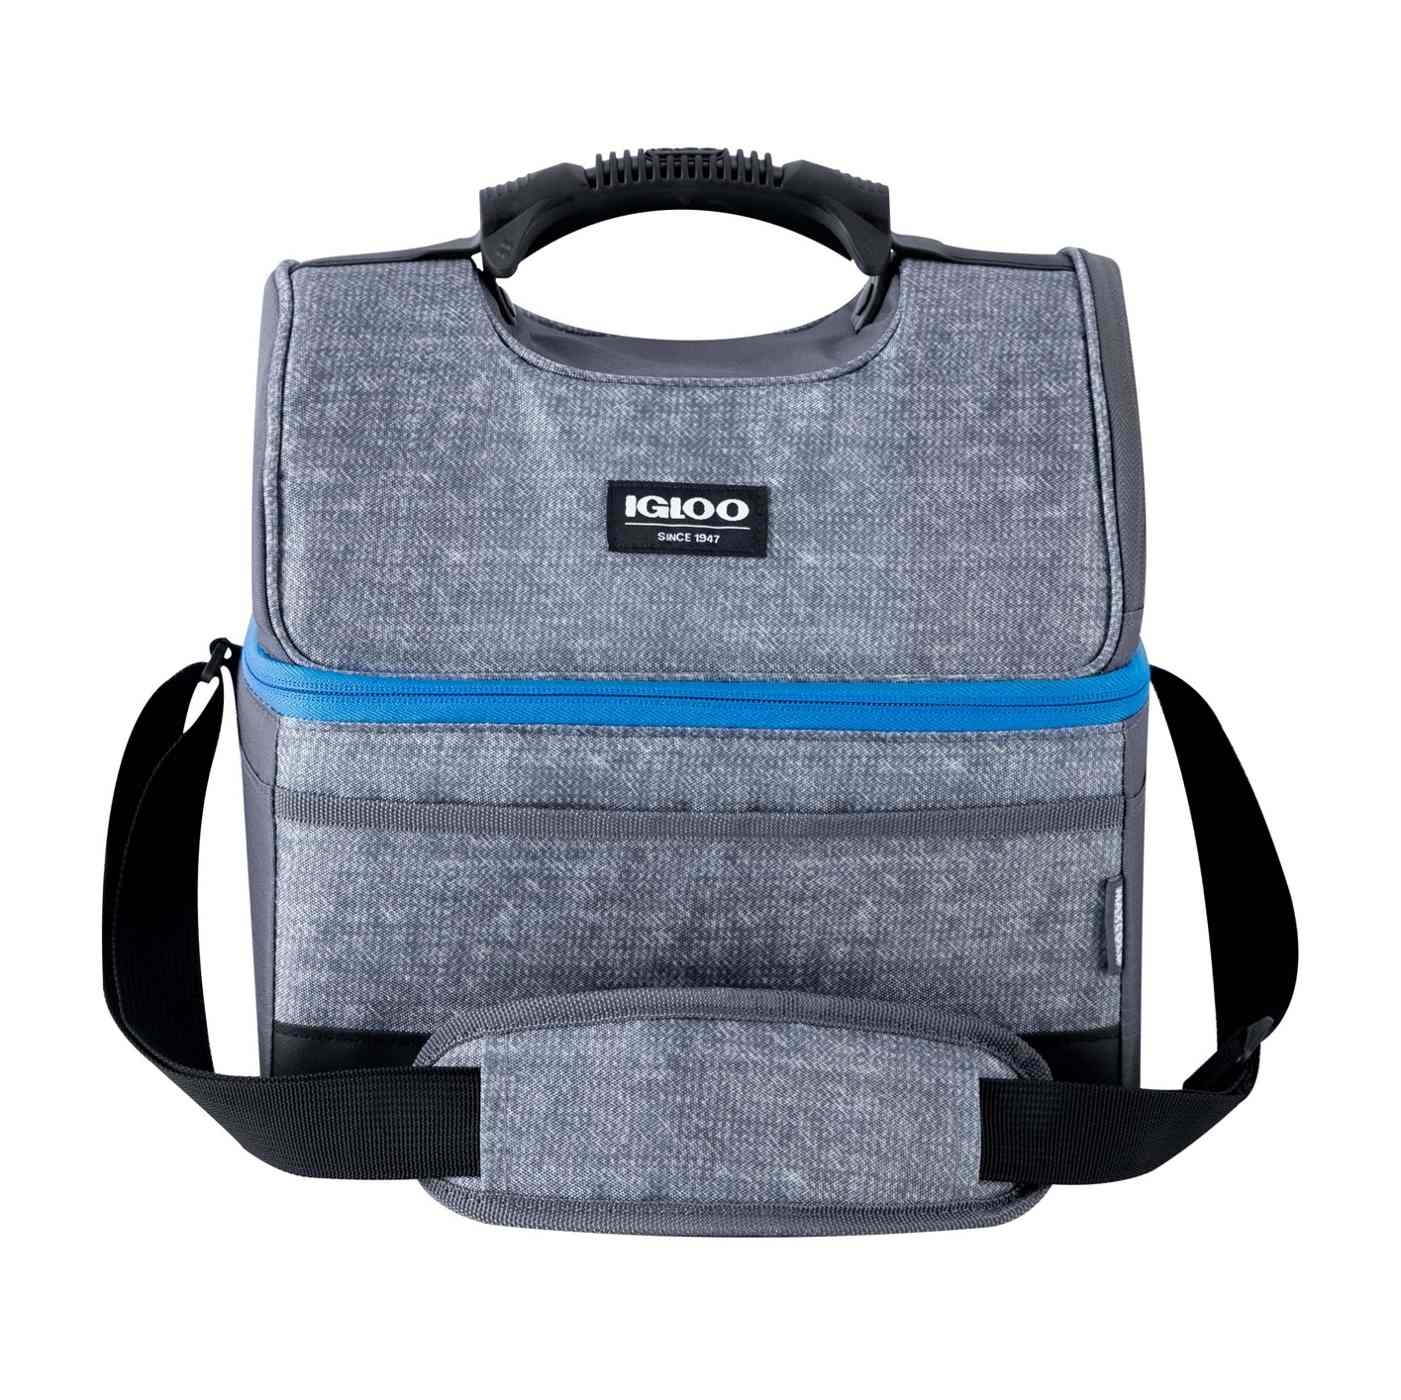 Igloo MaxCold Playmate Gripper Cooler Bag - Gray; image 1 of 4